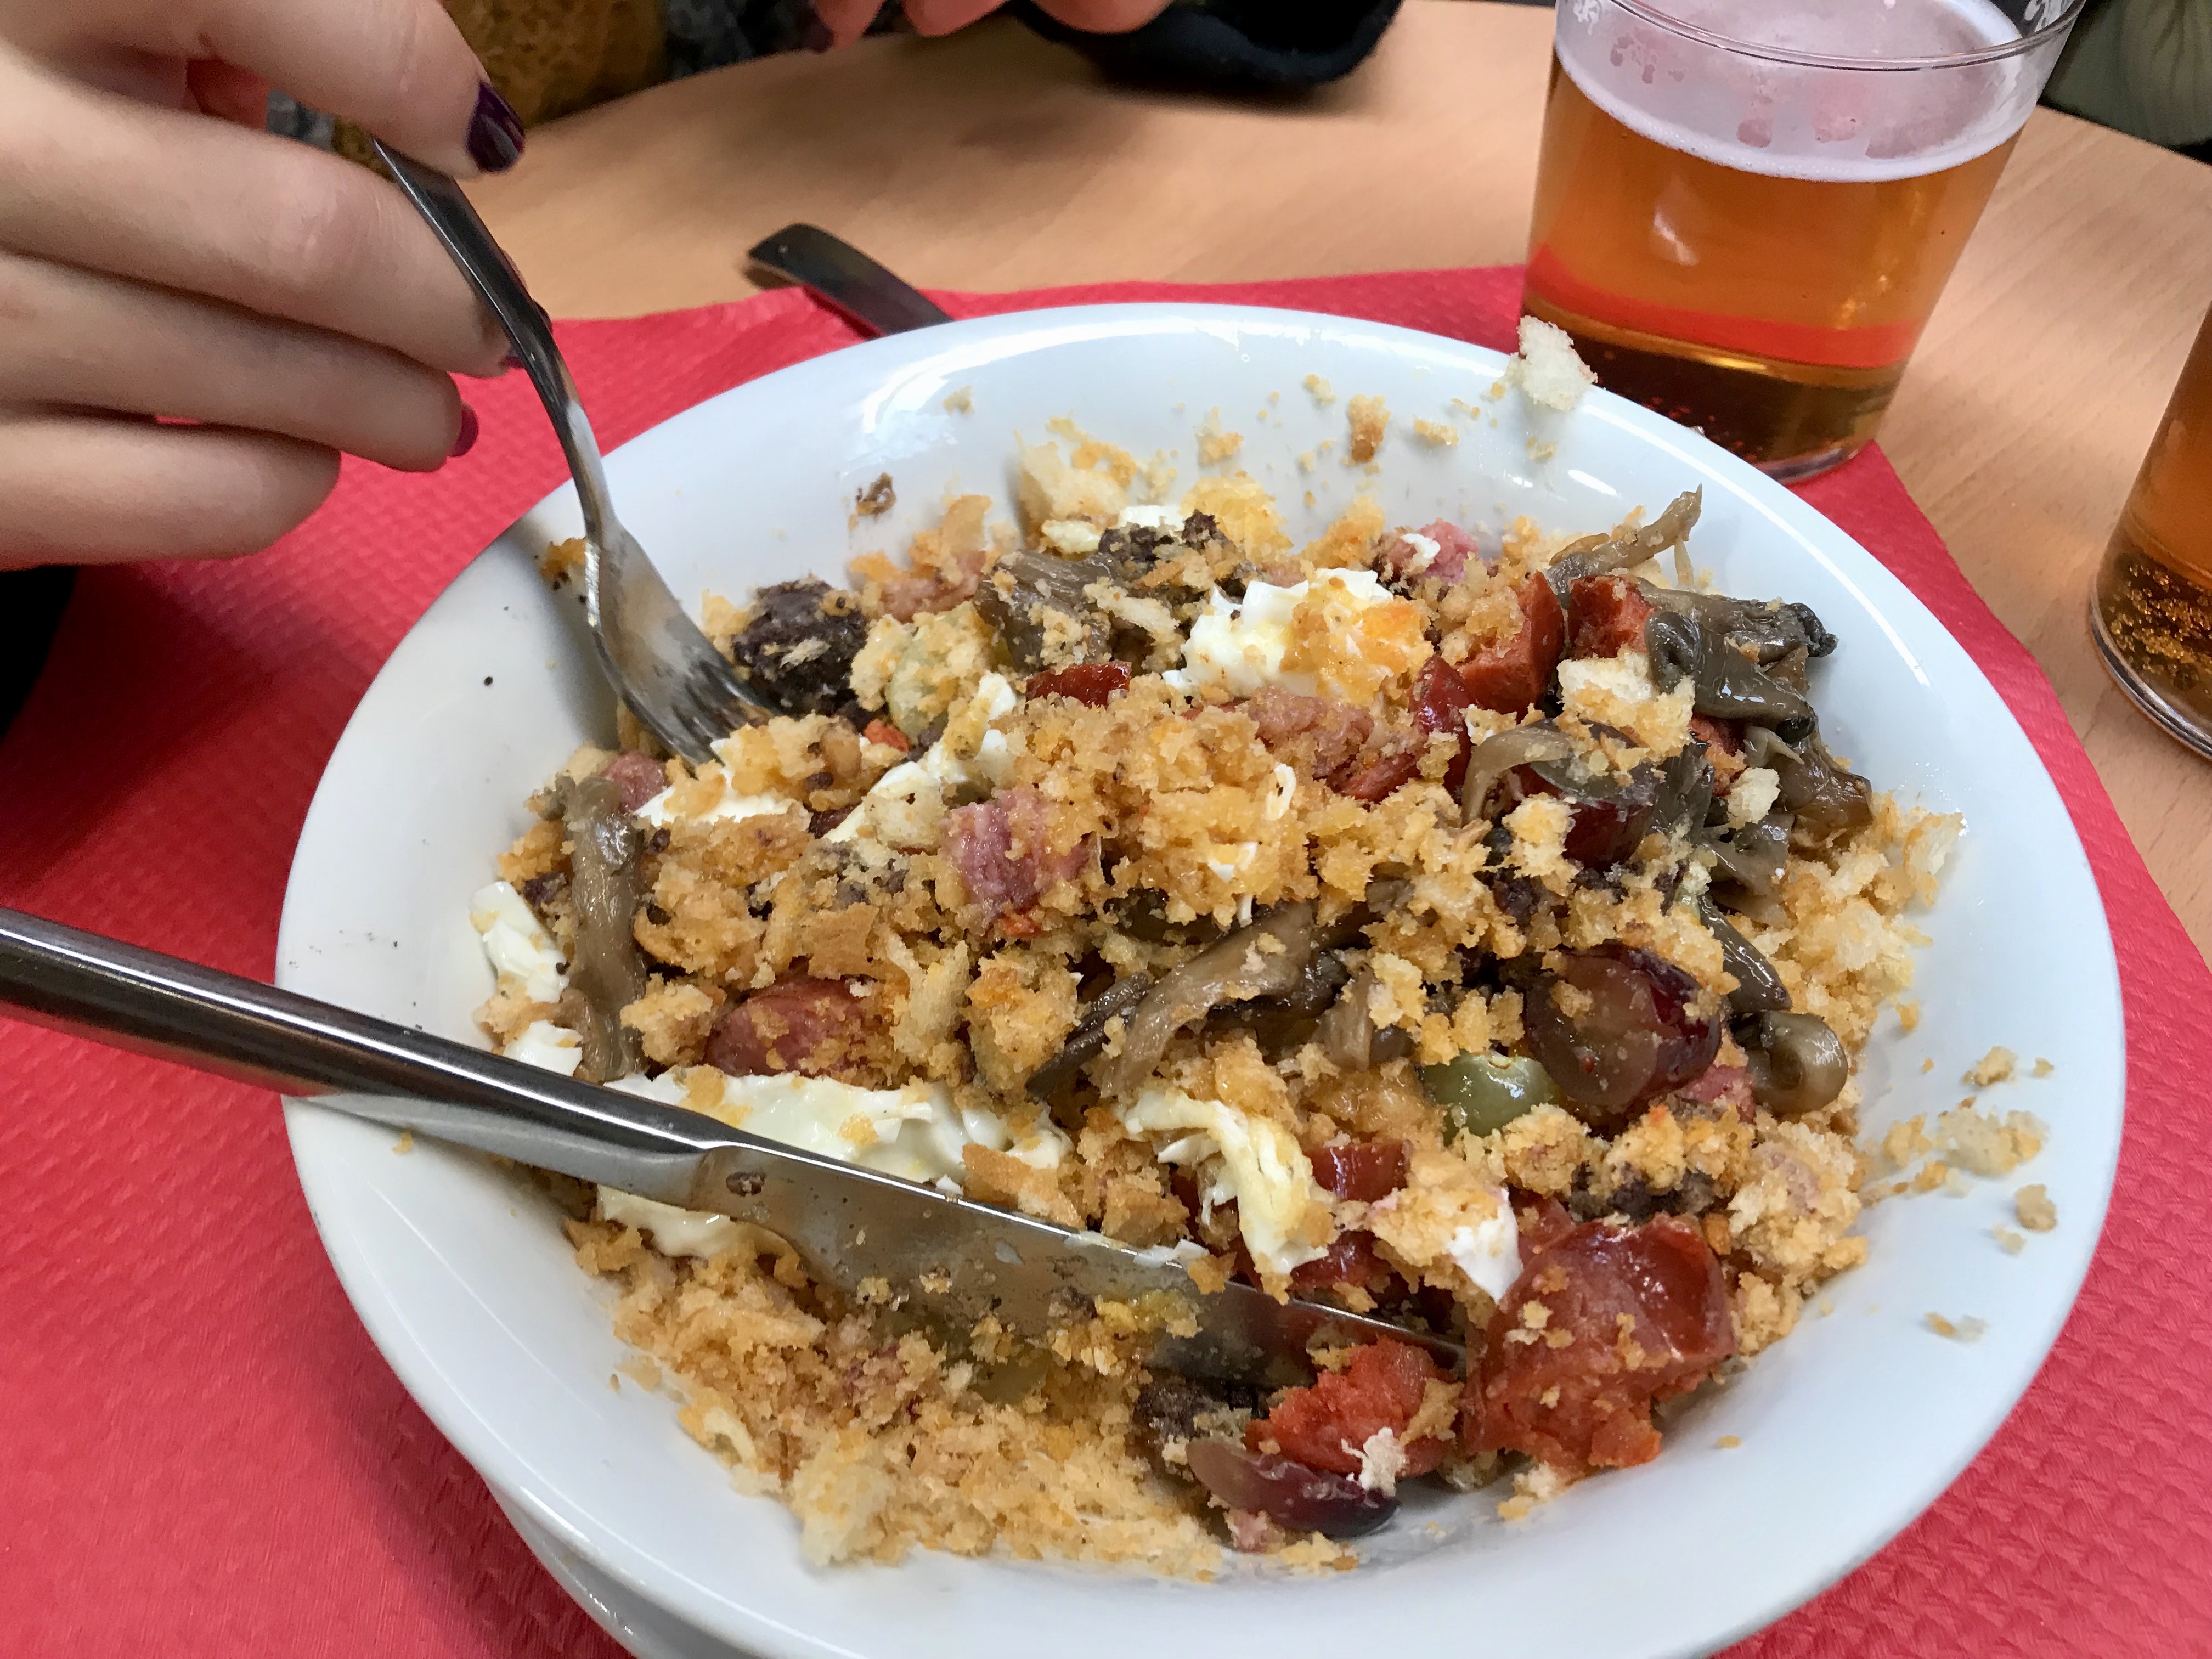 The plate of "migas" after being mashed up